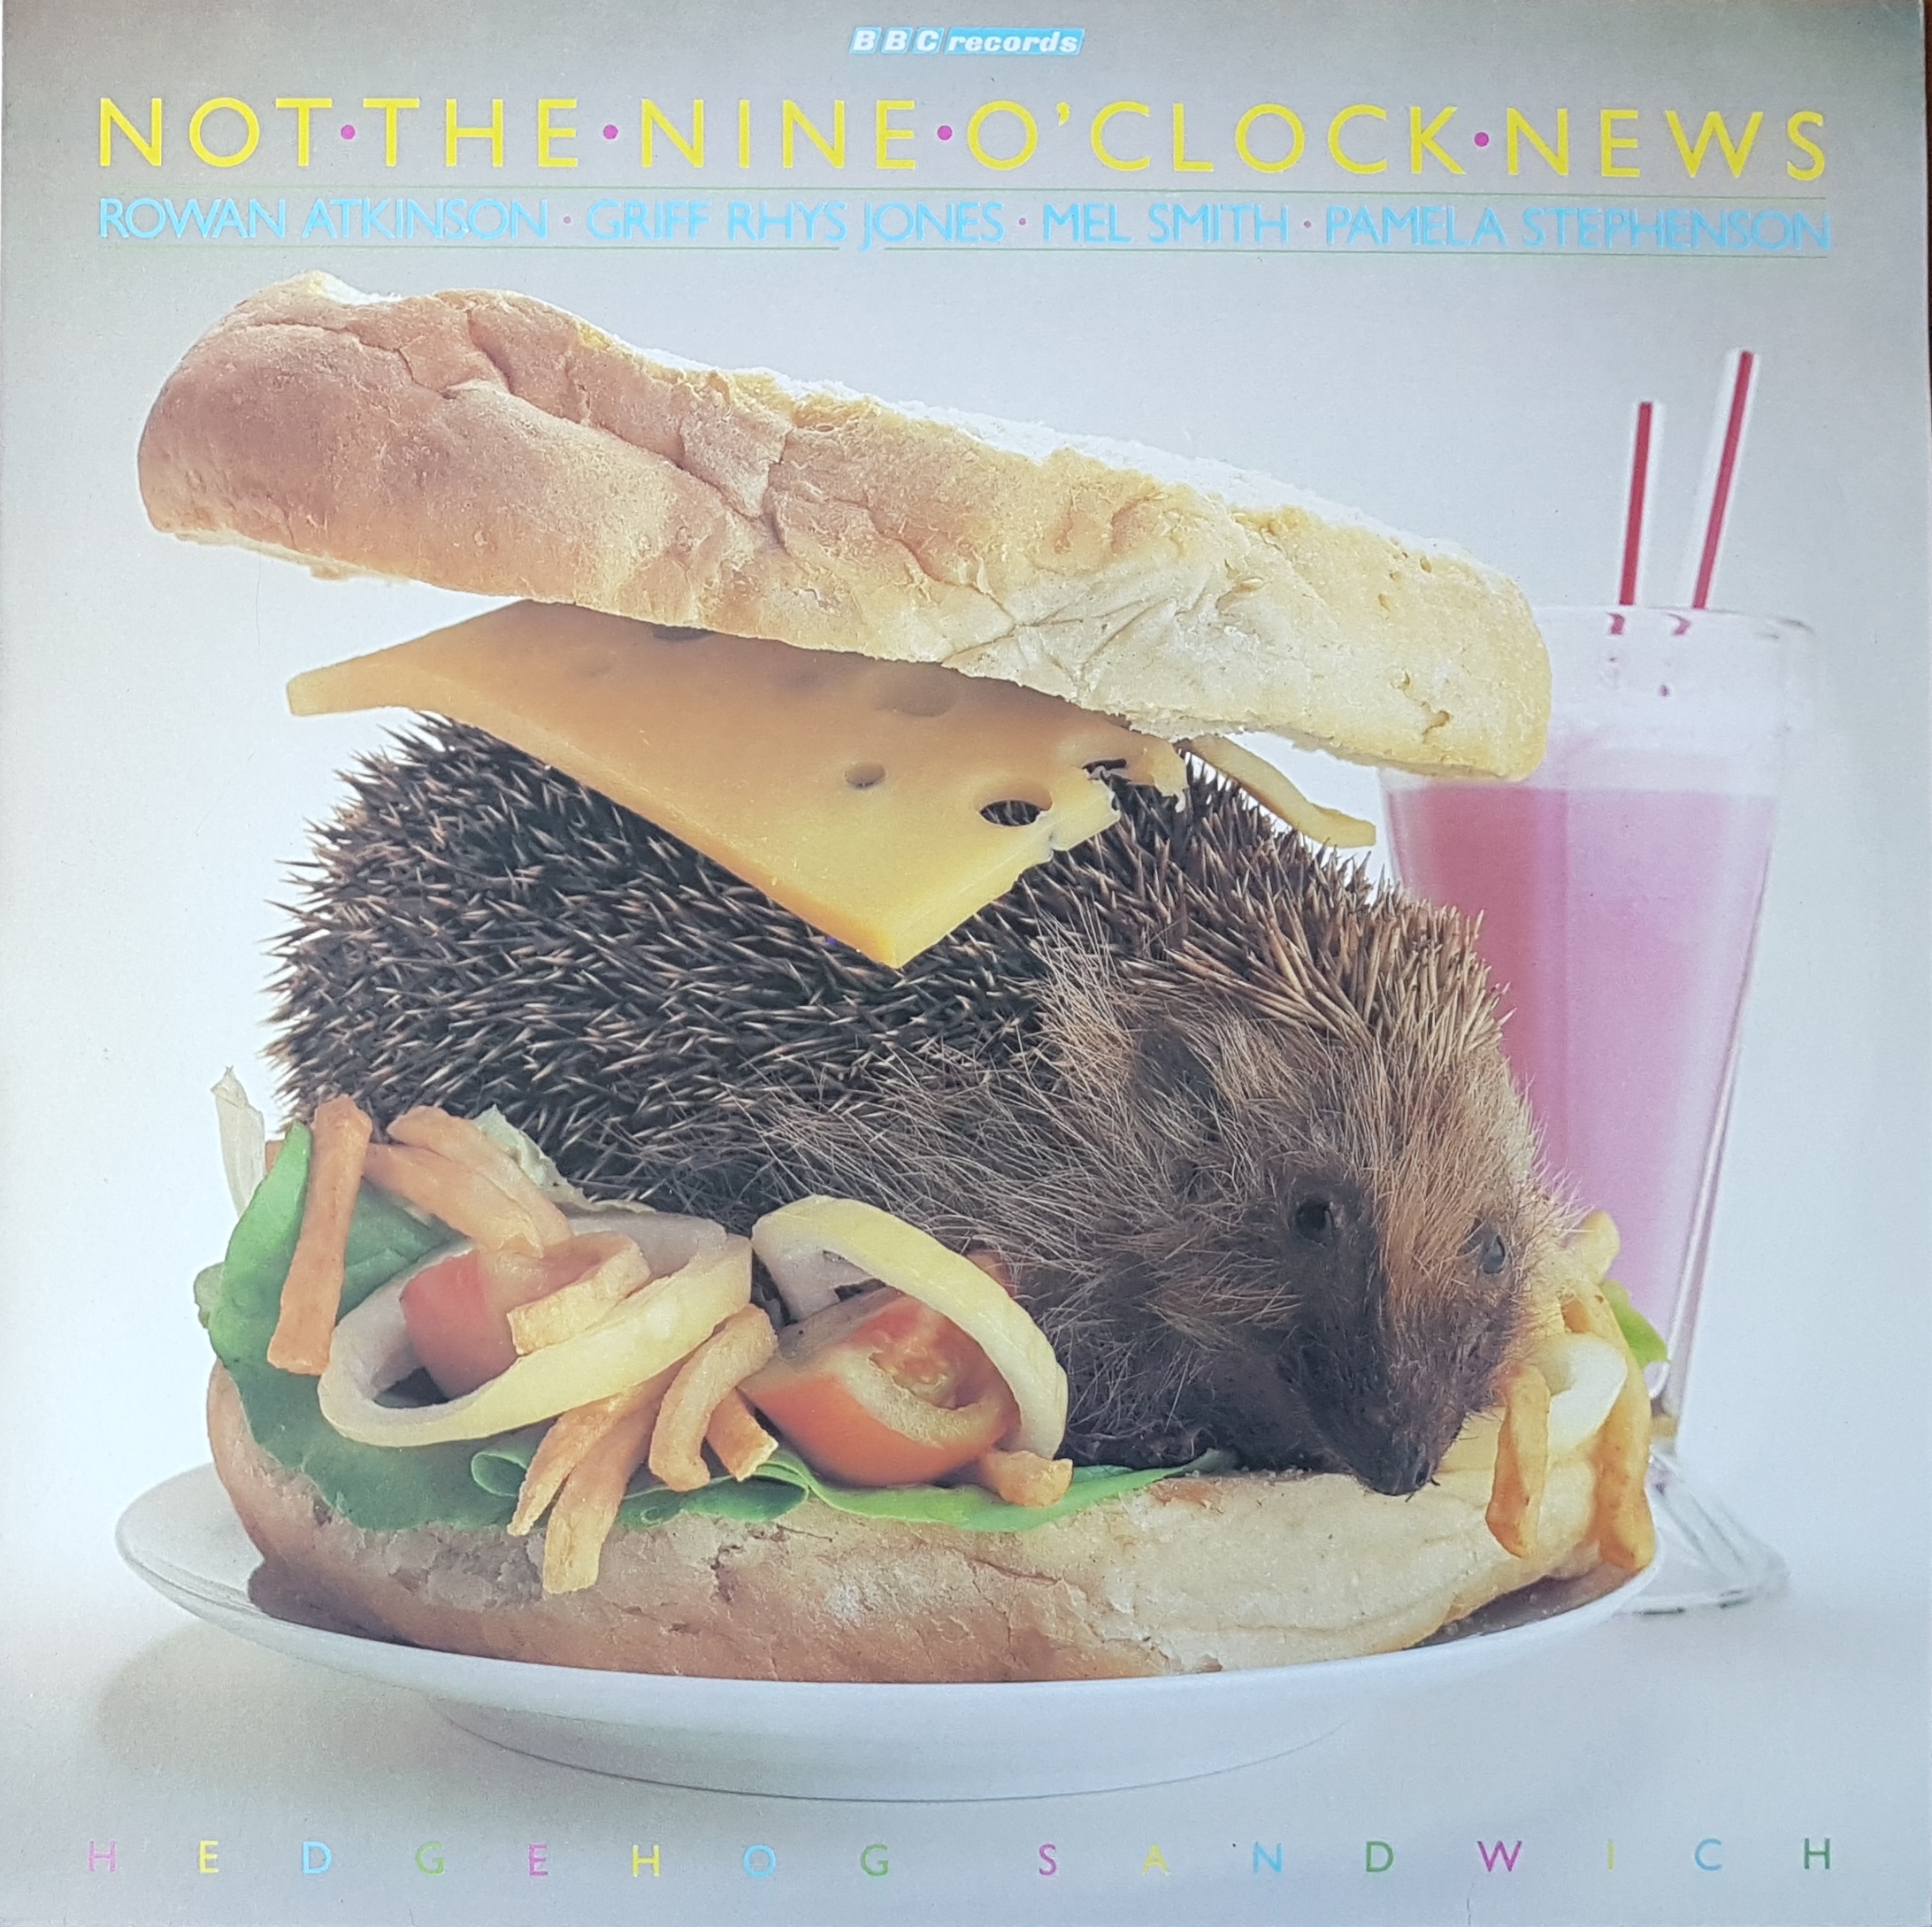 Picture of REB 421 Not the nine o'clock news - Hedgehog sandwich by artist Various from the BBC albums - Records and Tapes library